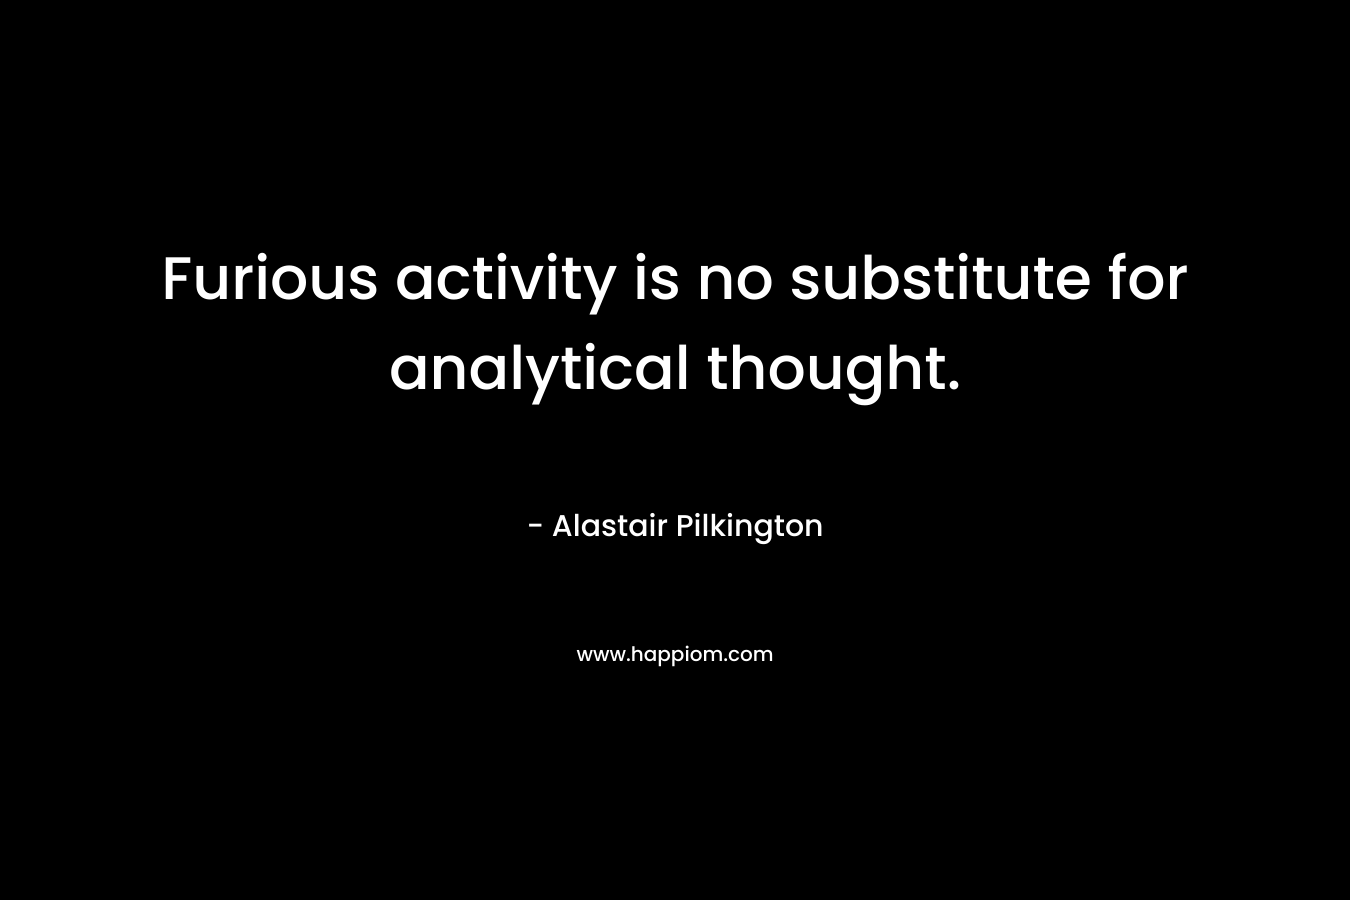 Furious activity is no substitute for analytical thought. – Alastair Pilkington